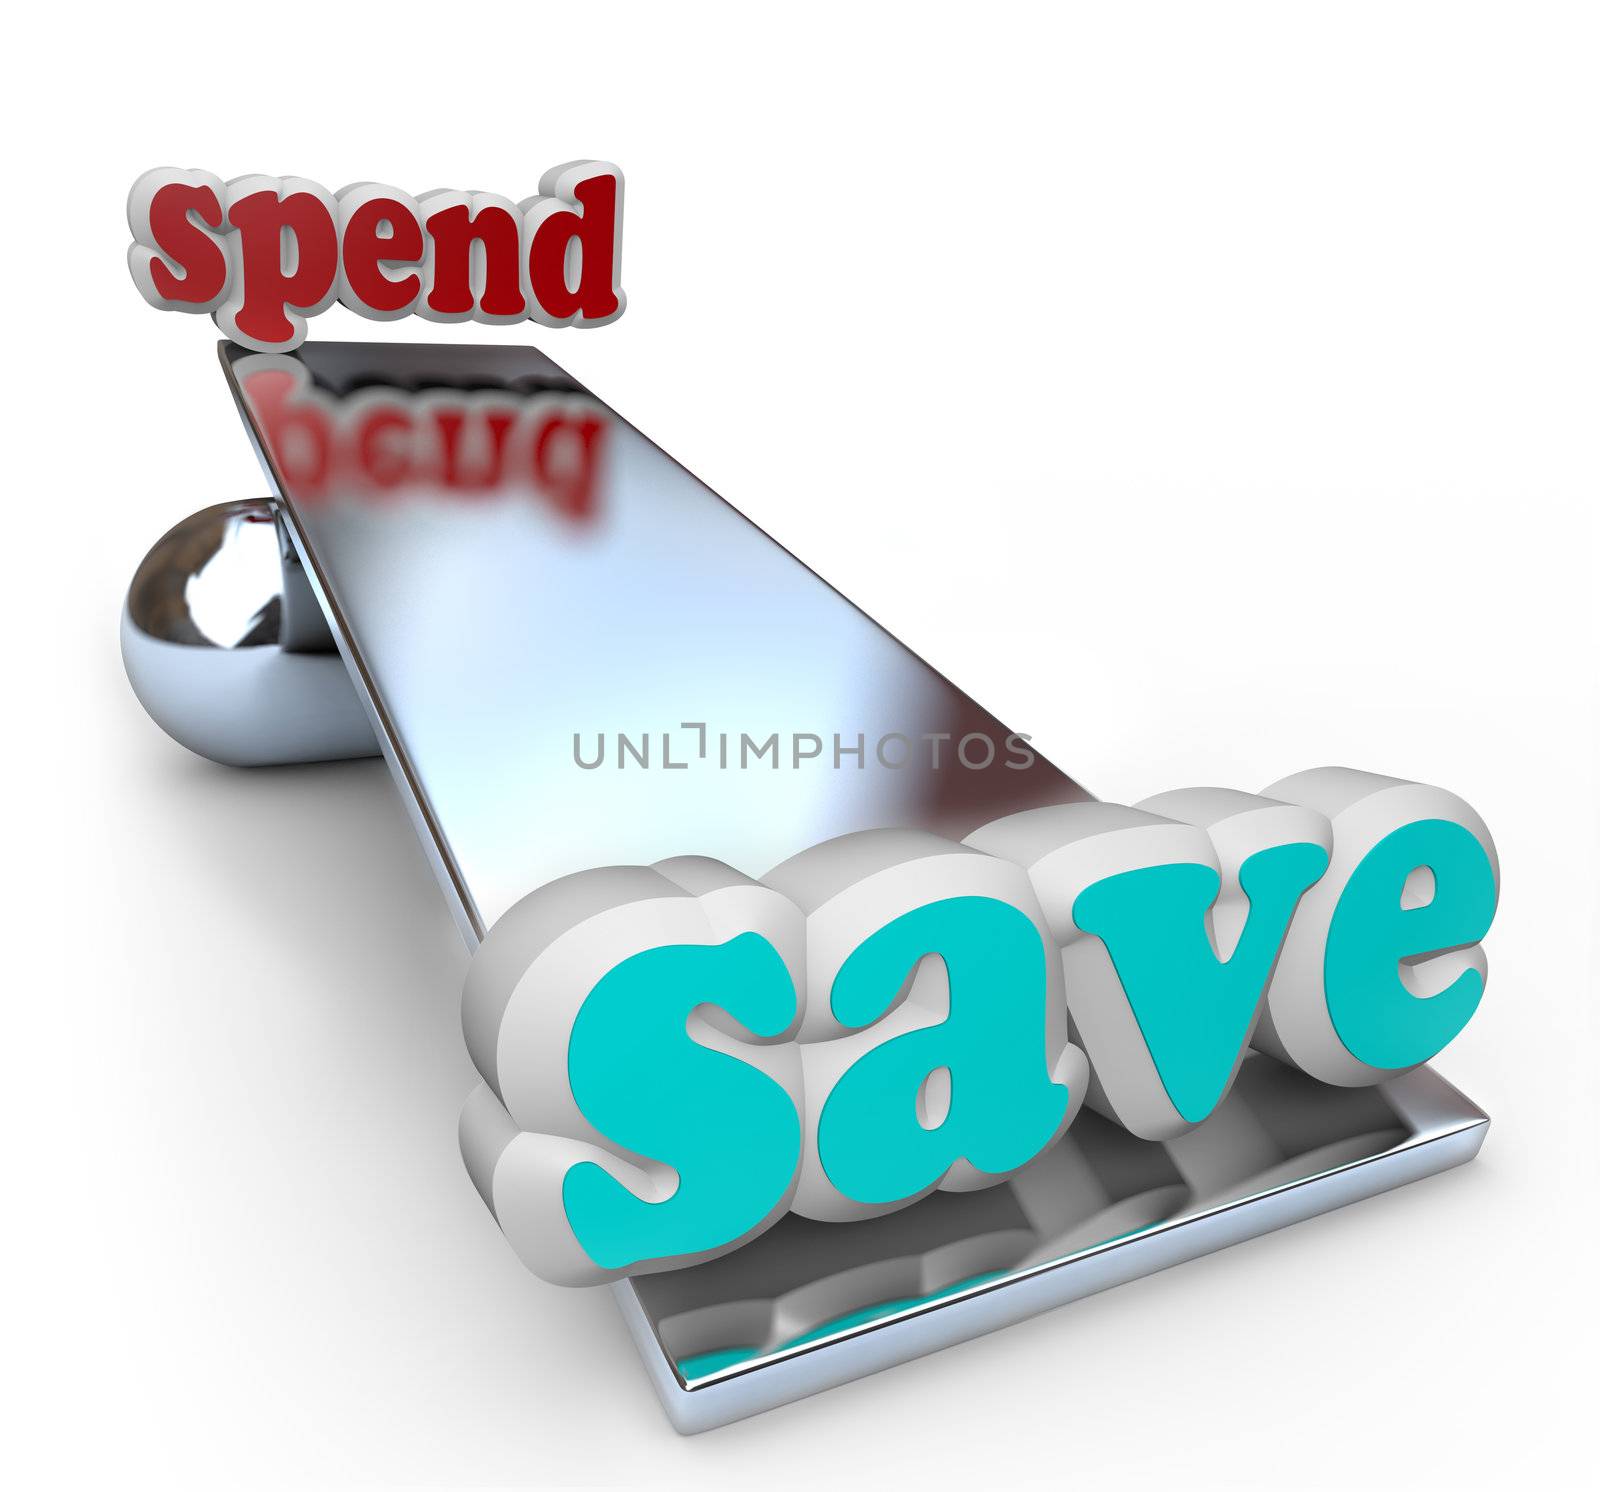 Save Money on Scale for Financial Fiscal Responsibility by iQoncept